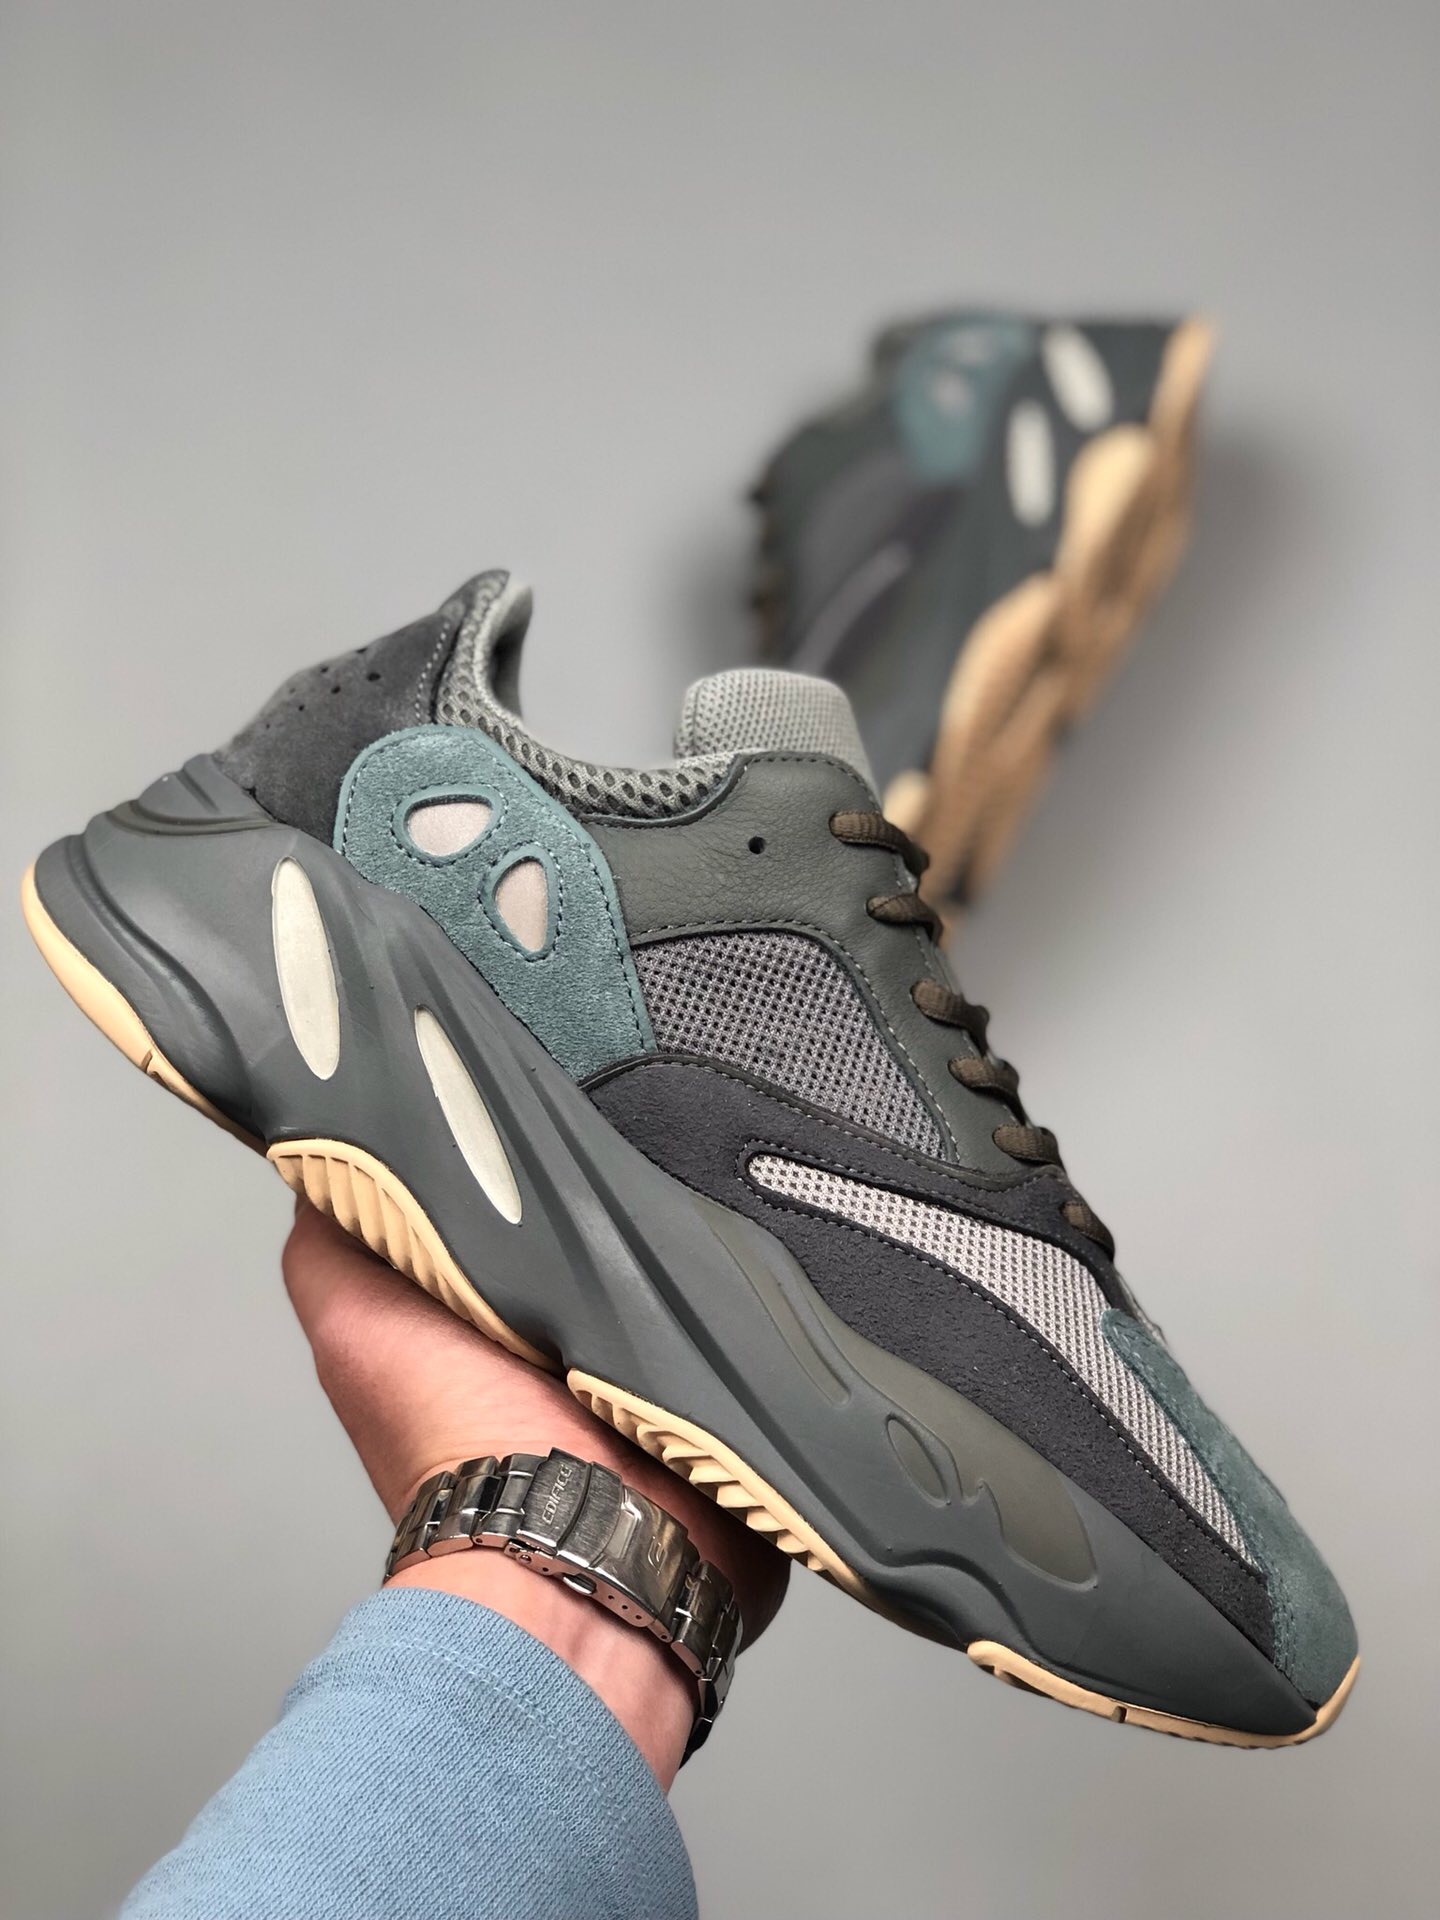 adidas Yeezy Boost 700 “Teal Blue” FW2499 For Sale – Sneaker Hello